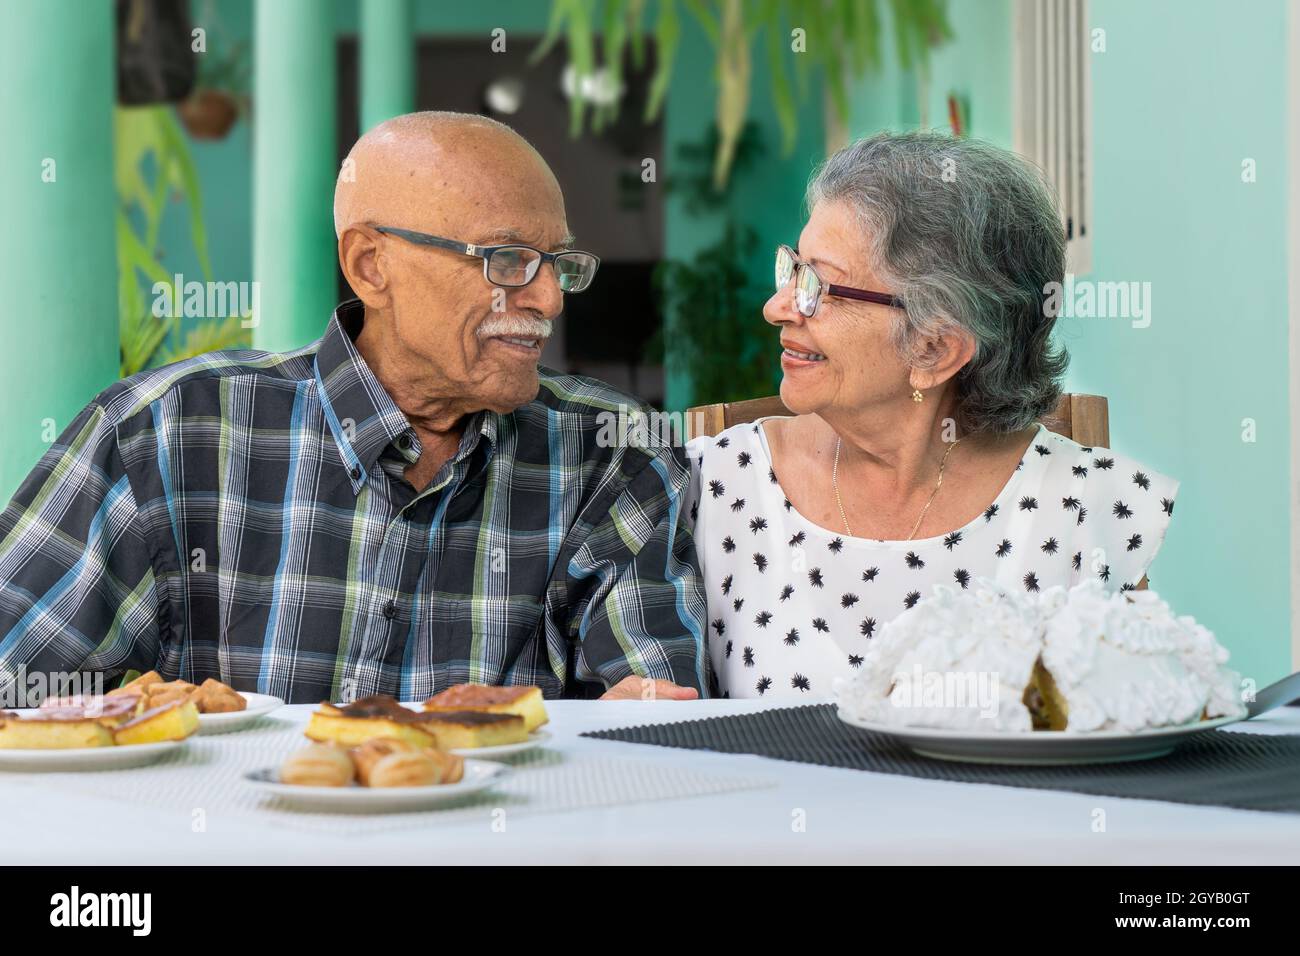 Elderly couple wearing glasses sitting at a table, both are smiling Stock Photo